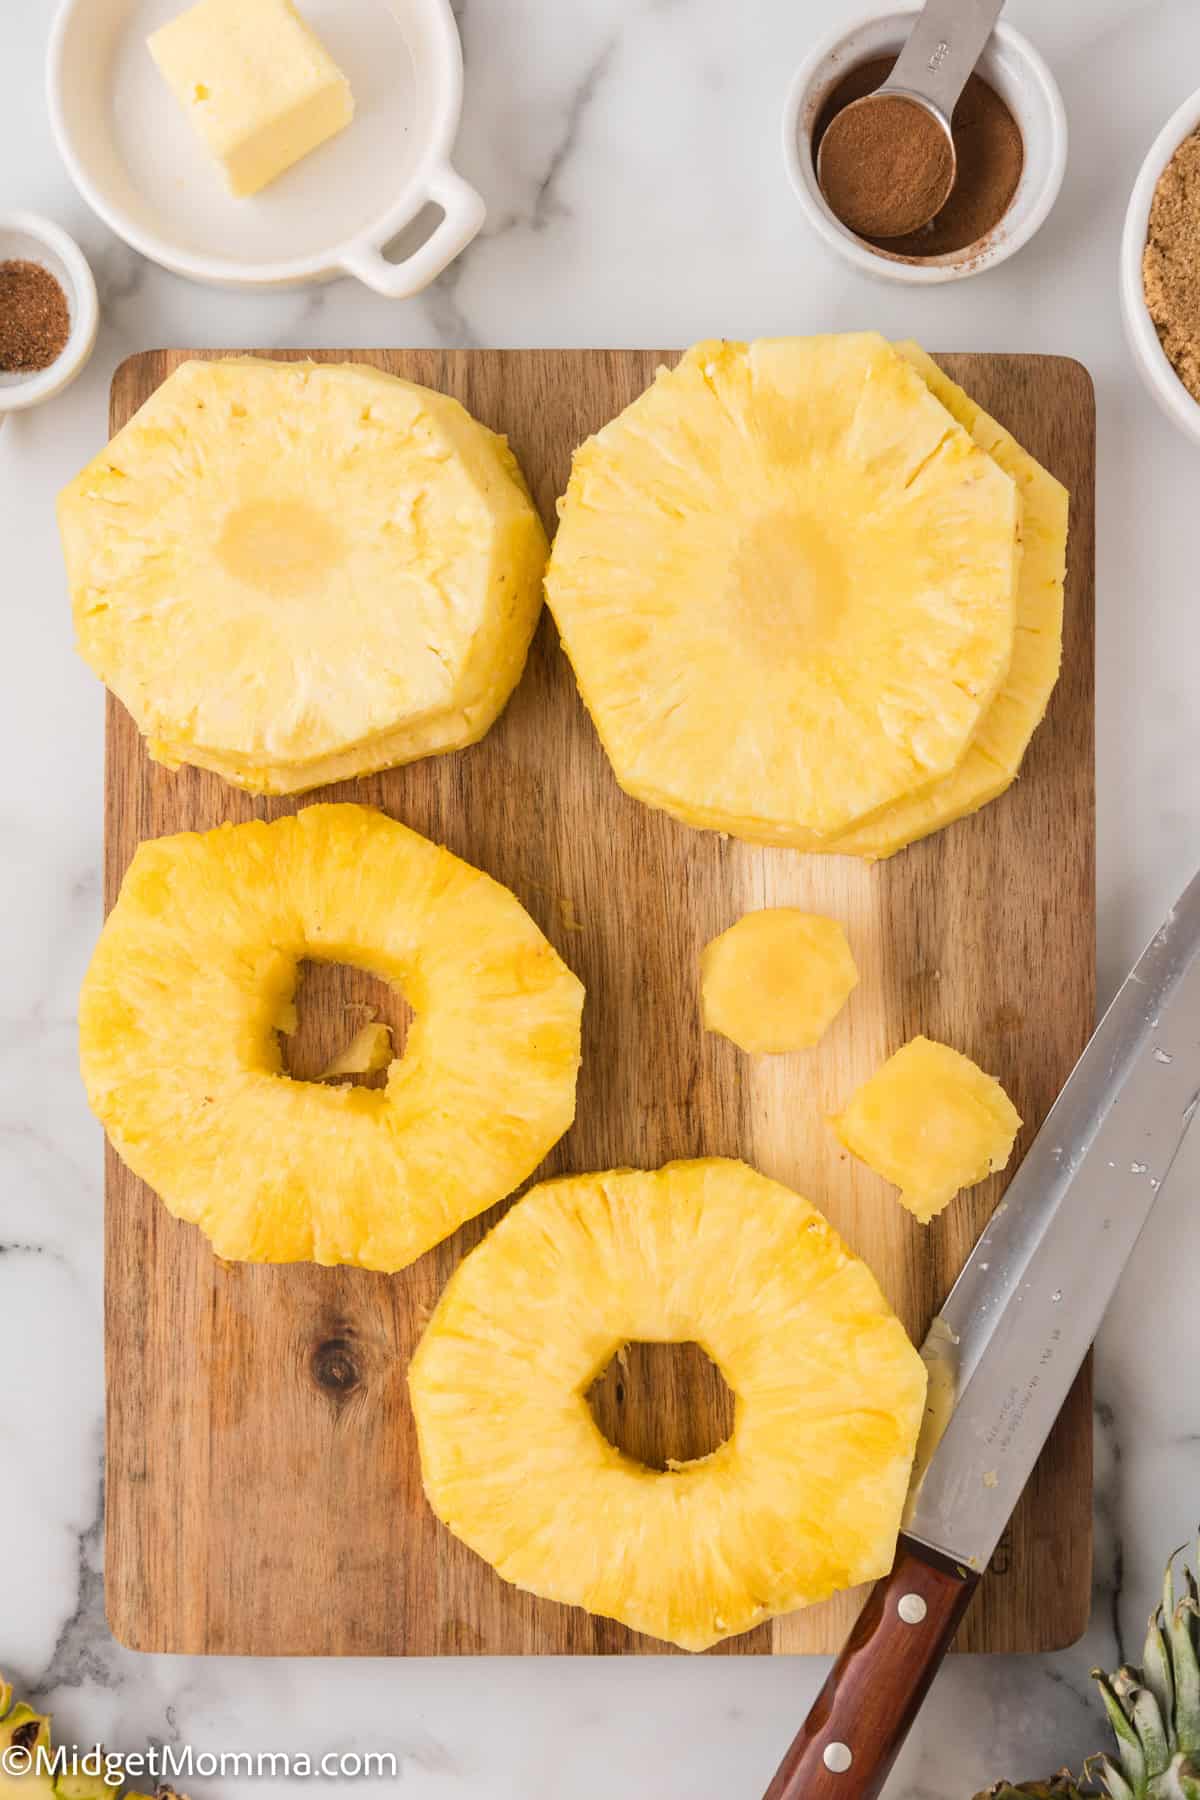 Sliced pineapple rings on a wooden cutting board next to a knife.